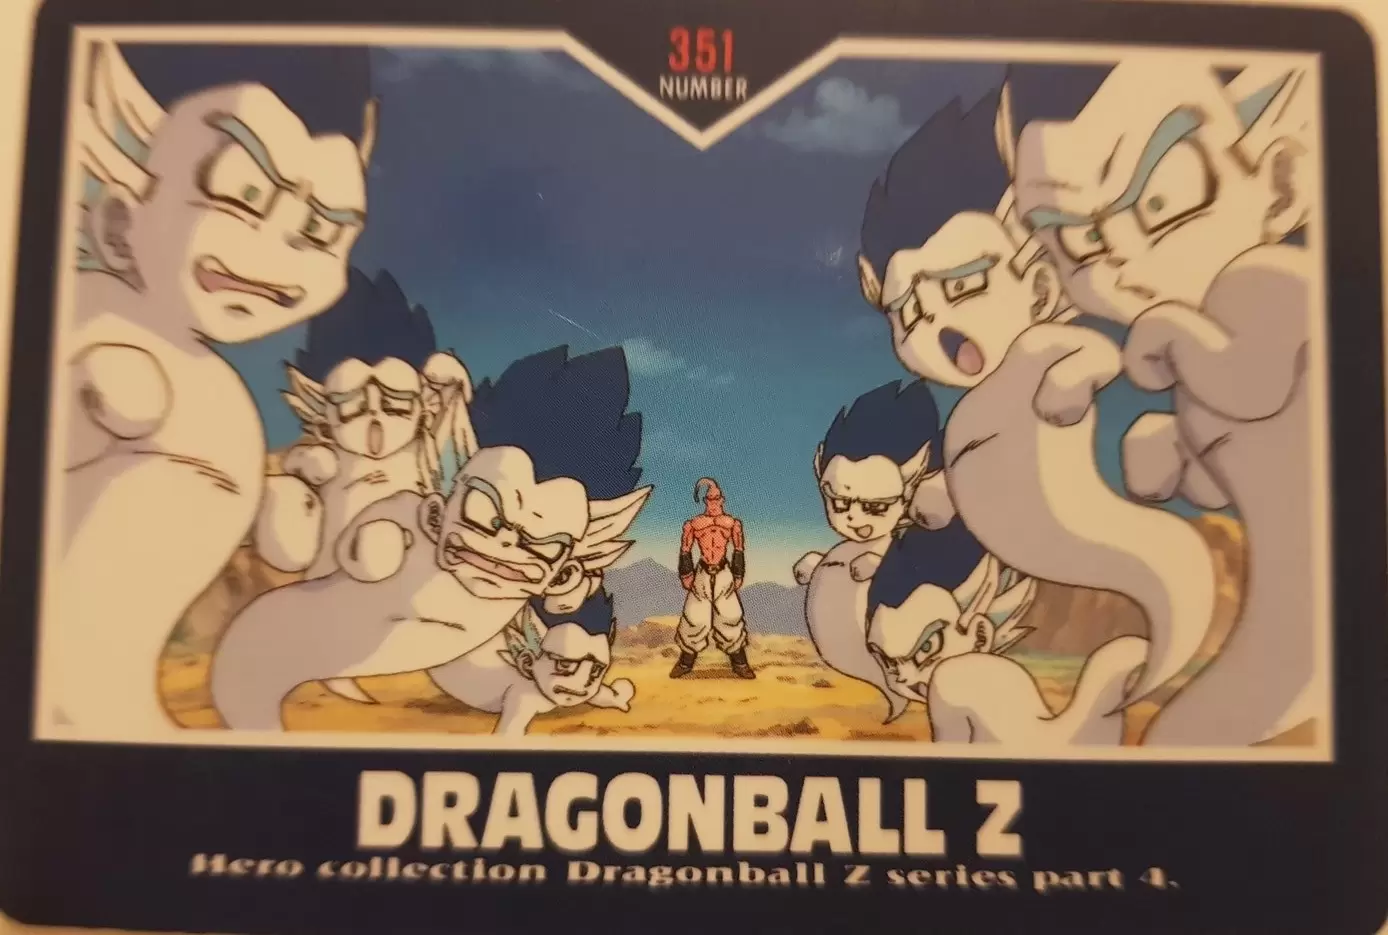 Dragon Ball Z Hero Collection Series Part 4 - Card number 351